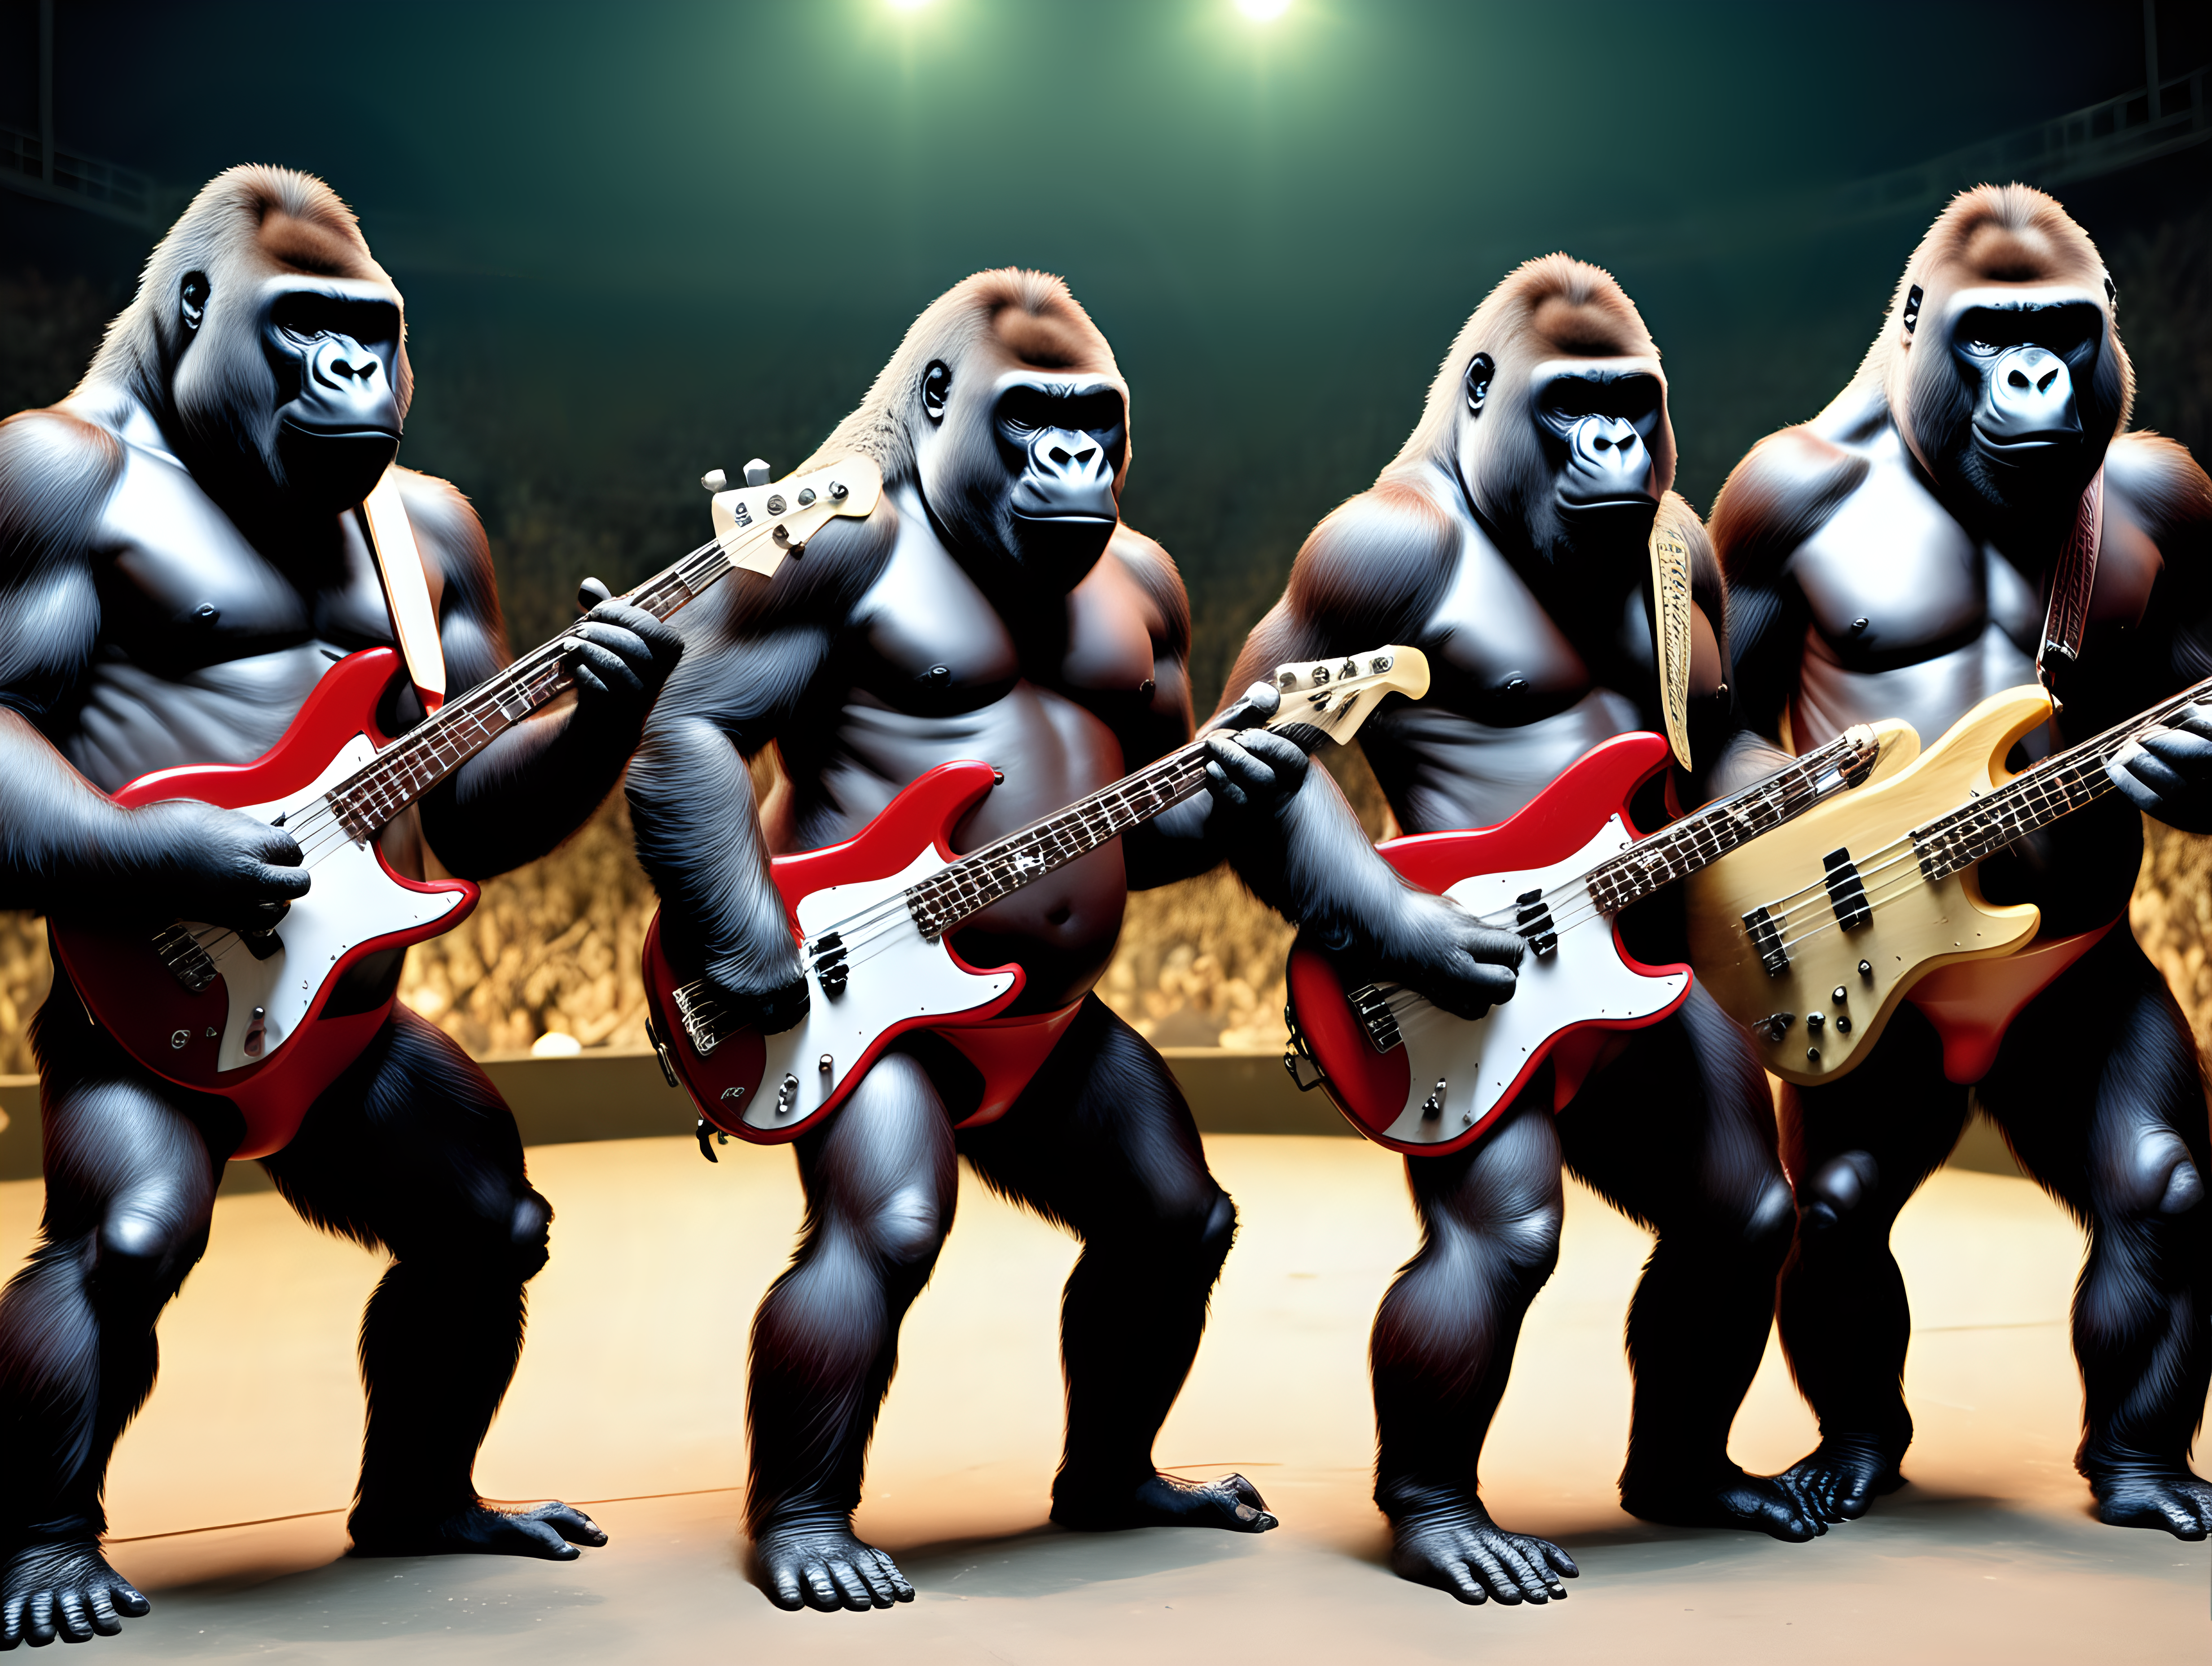 5 gorillas in bathing suits playing bass guitars in an arena at night